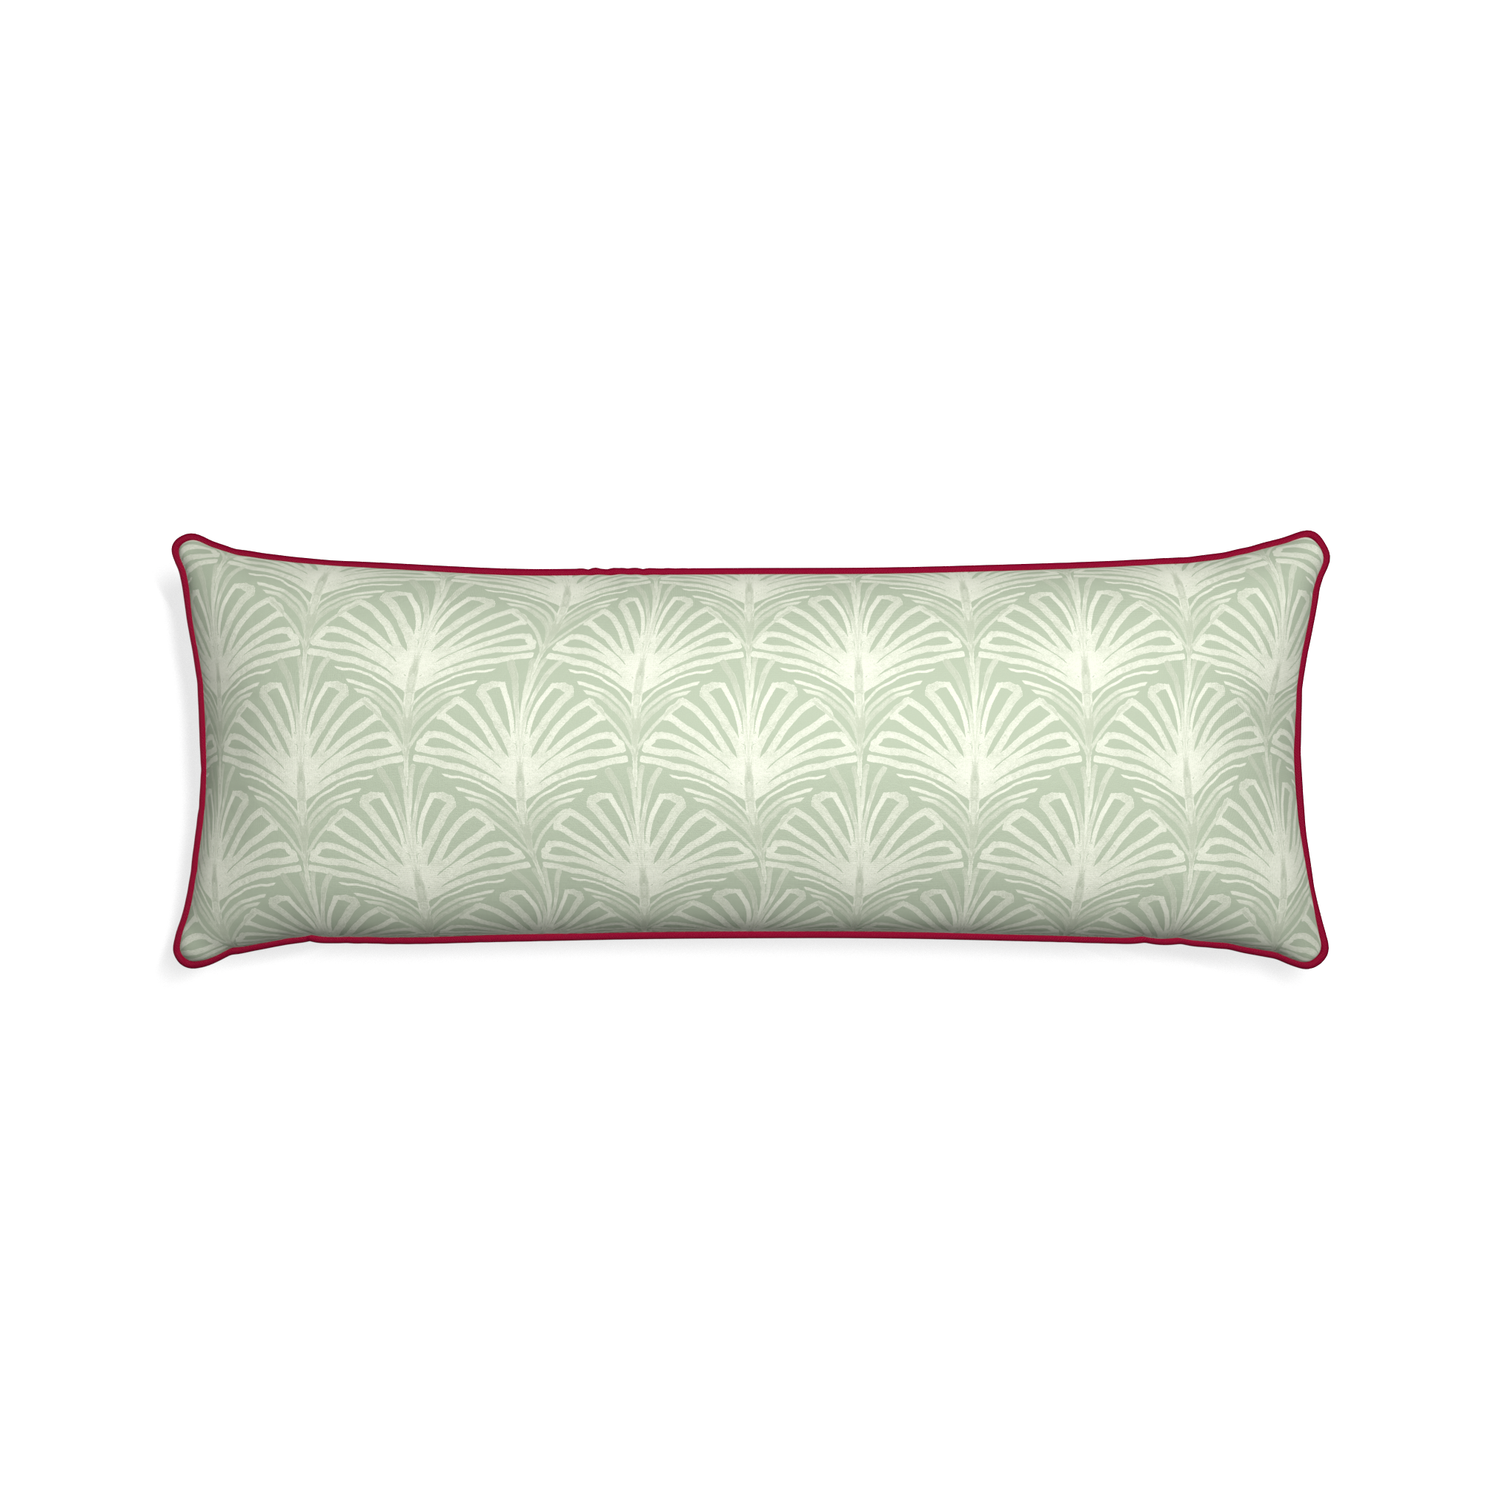 Xl-lumbar suzy sage custom sage green palmpillow with raspberry piping on white background